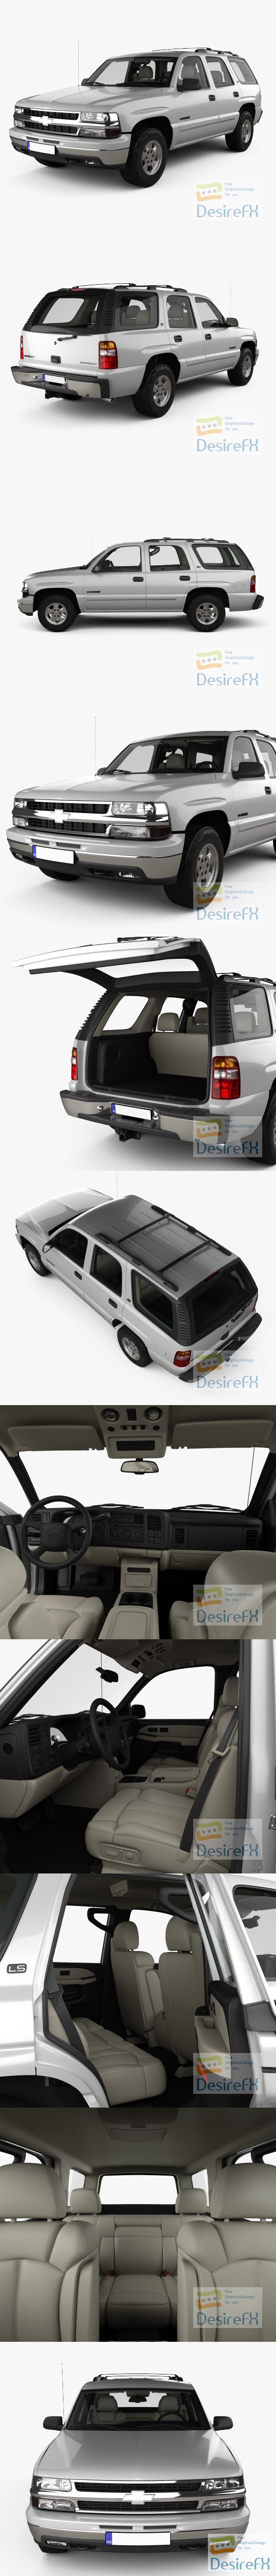 Chevrolet Tahoe LS with HQ interior 2002 3D Model